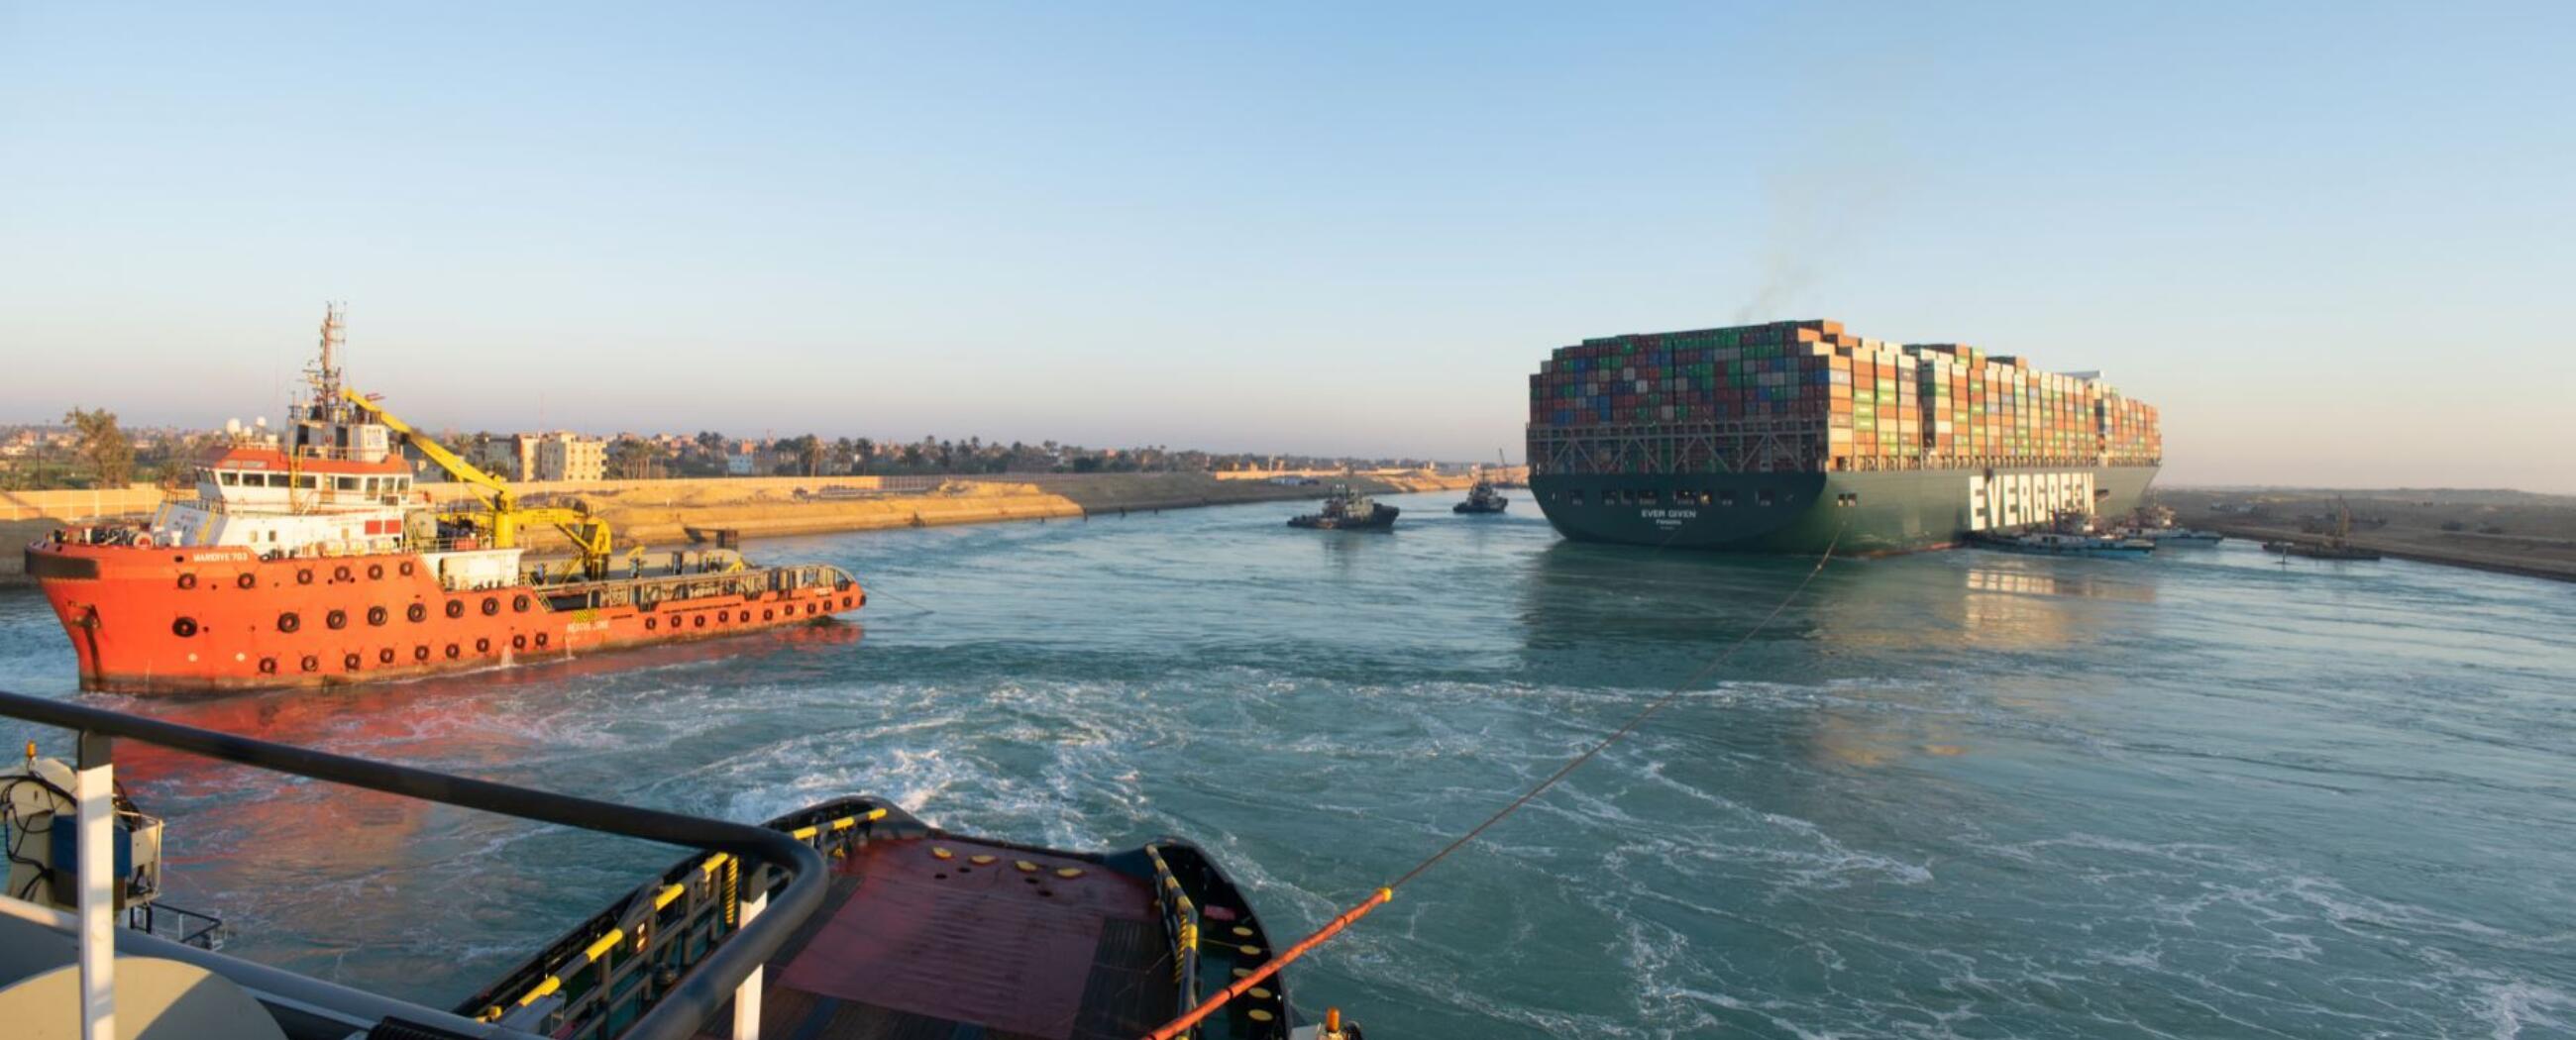 ALP-Guard-refloating-Ever-Given-Suez-Canal-March2021_LR.JPG